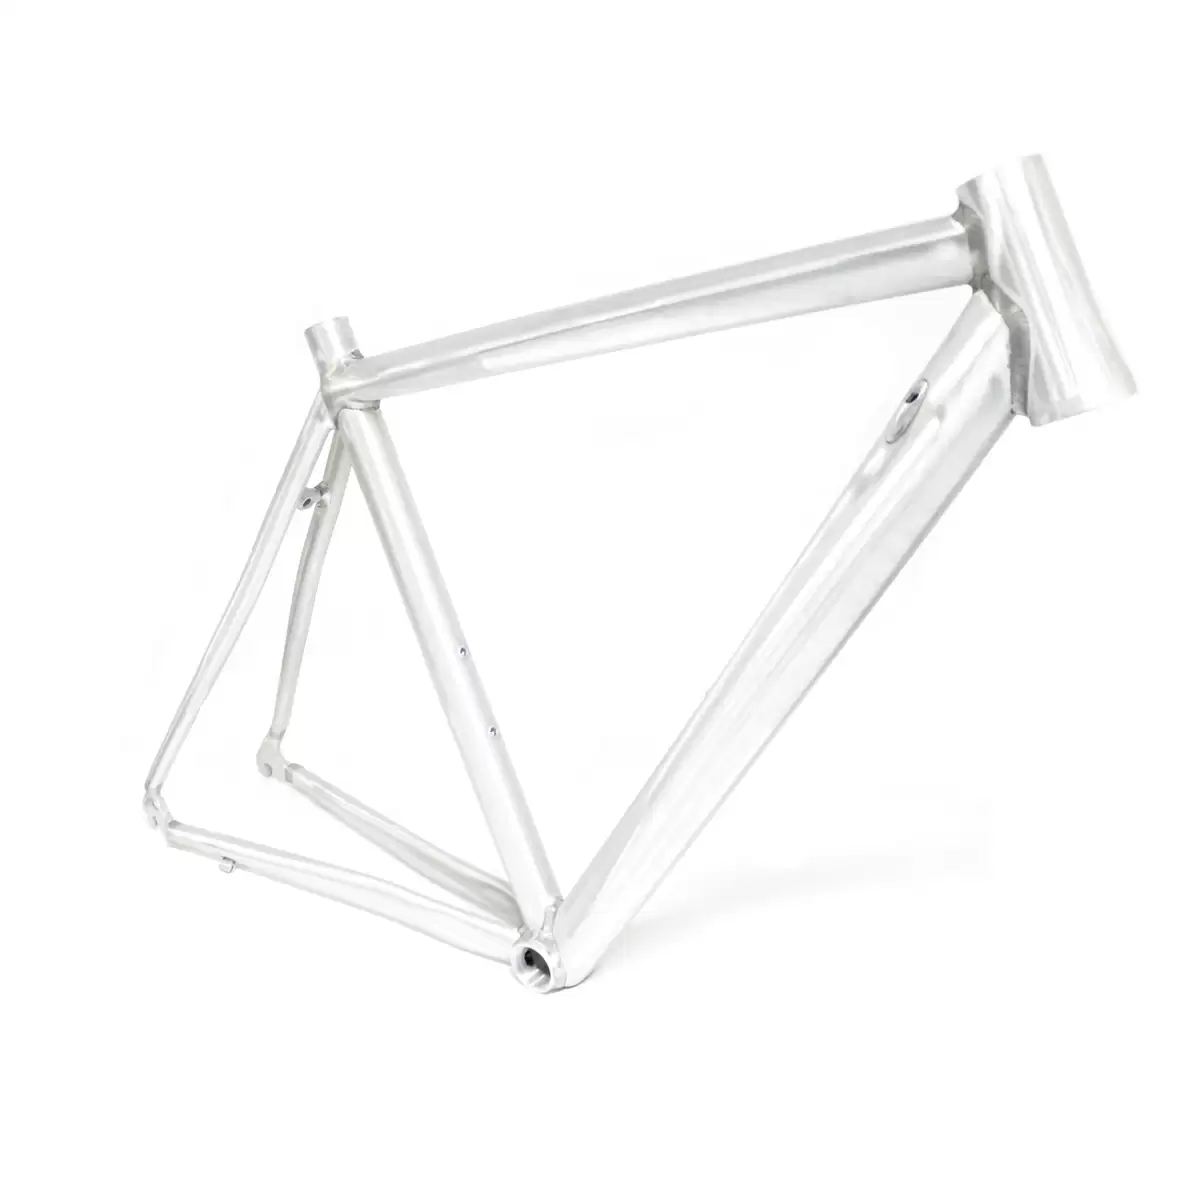 Road alloy tapered Caliper Frame size 49 - image